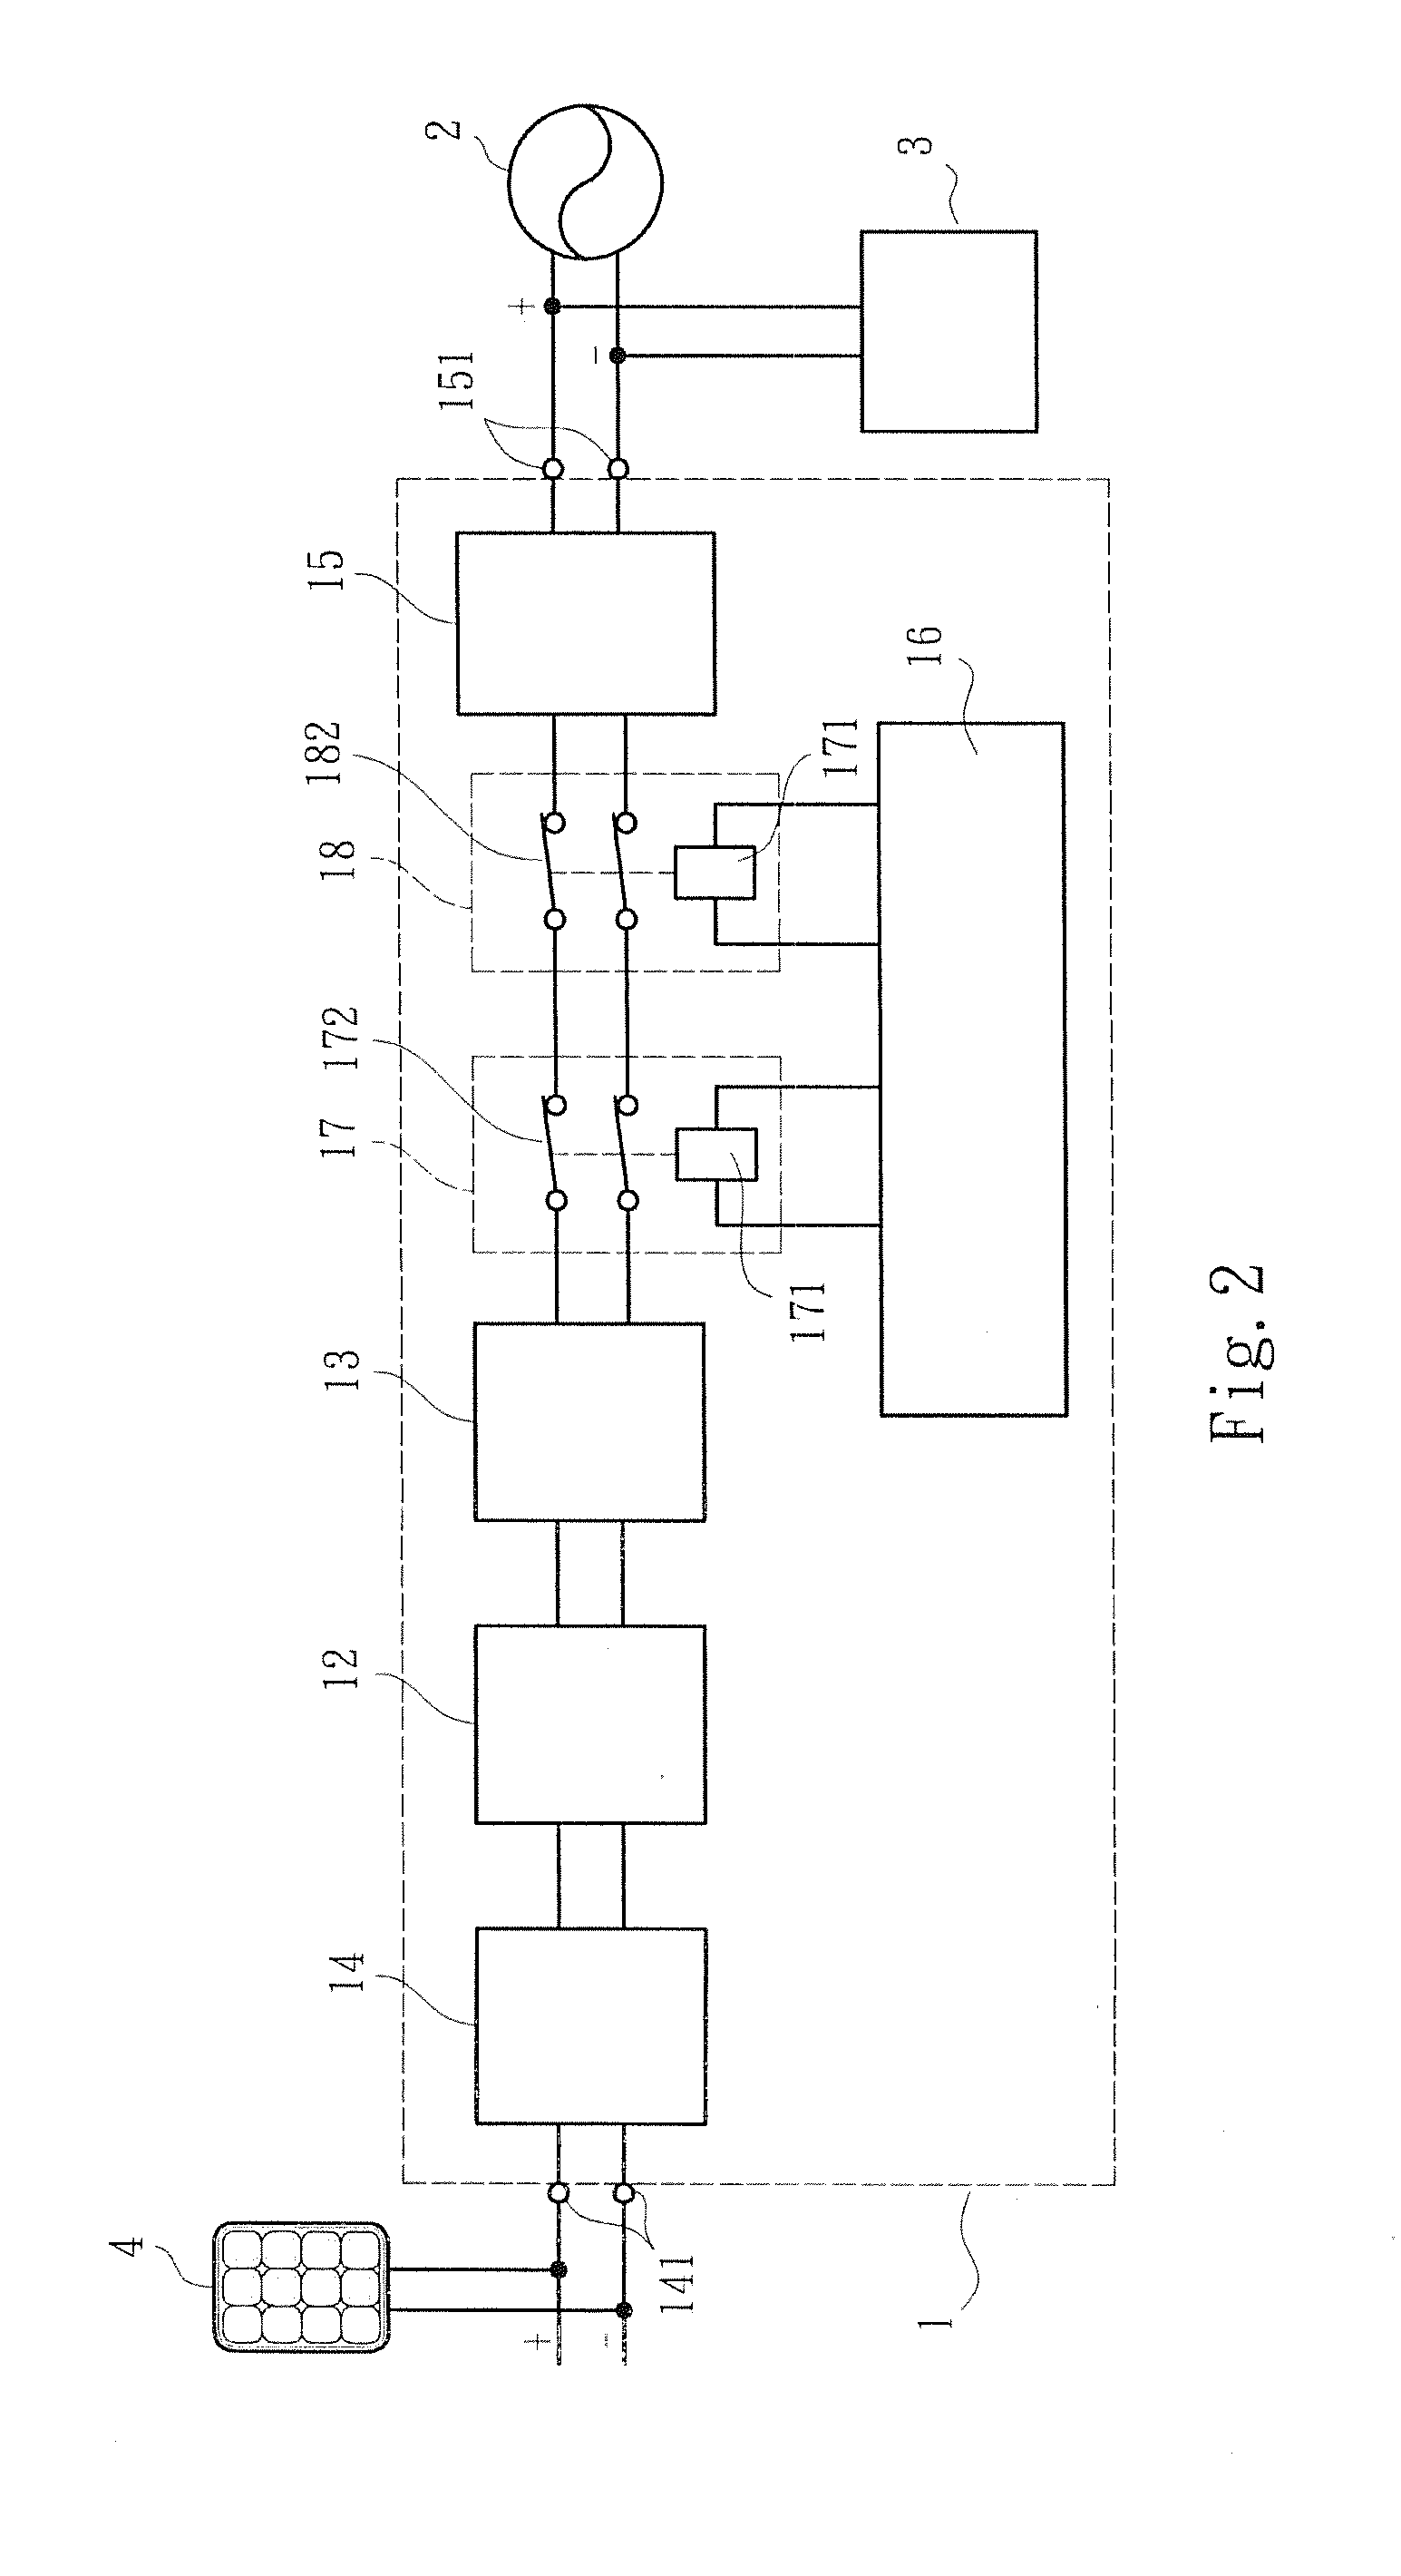 Power conversion device for solar energy generating system